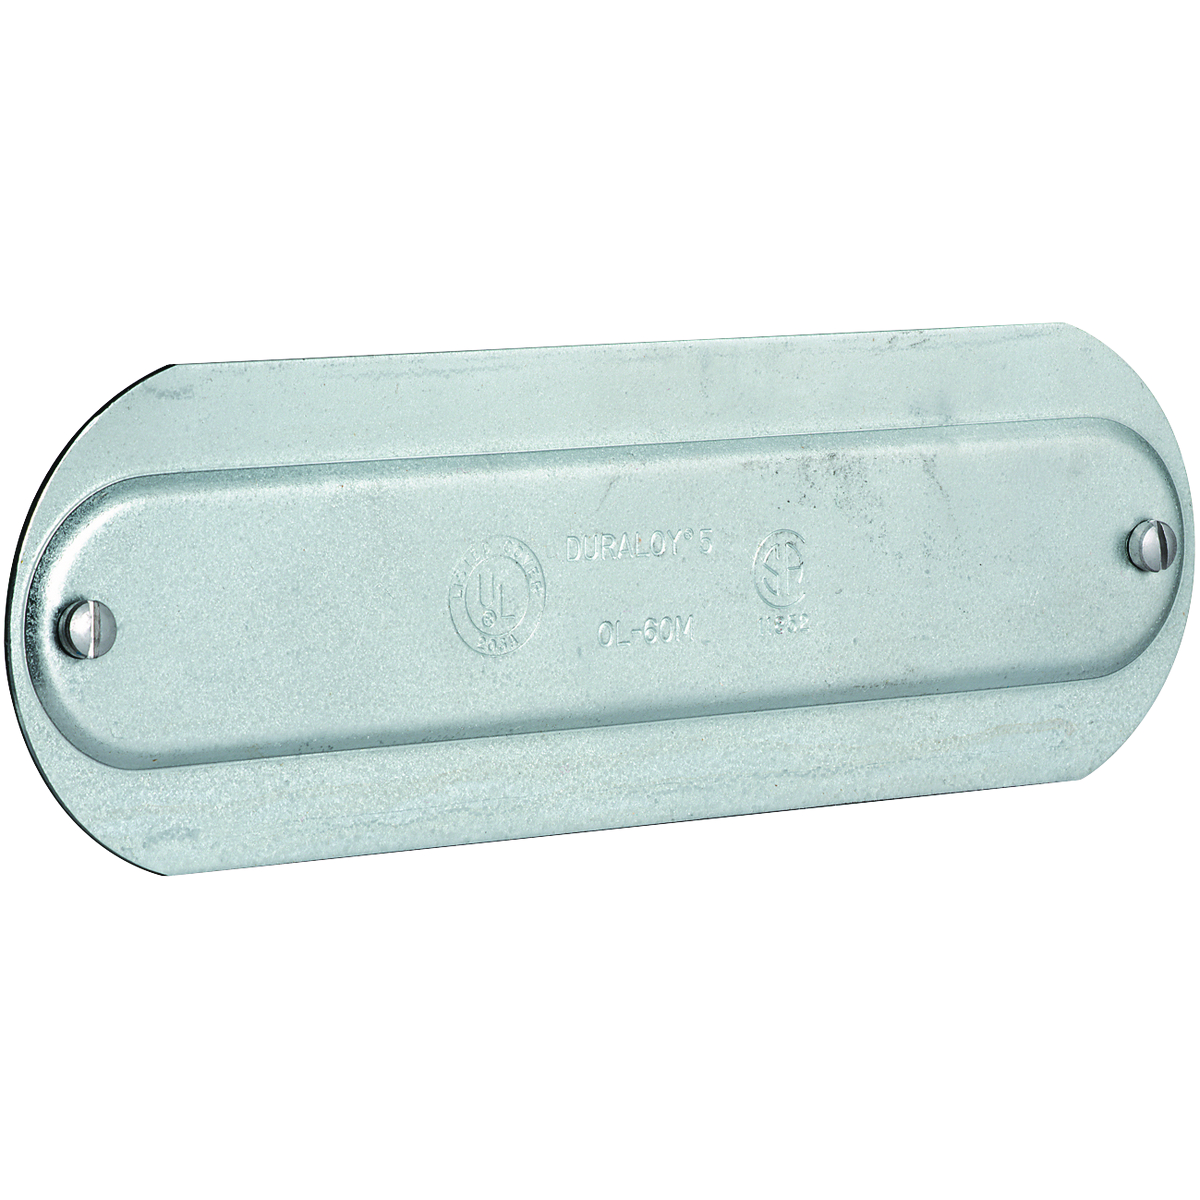 O SERIES/DURALOY 5 SERIES - STEEL STAMPED CONDUIT BODY COVER - HUB SIZE2 INCH